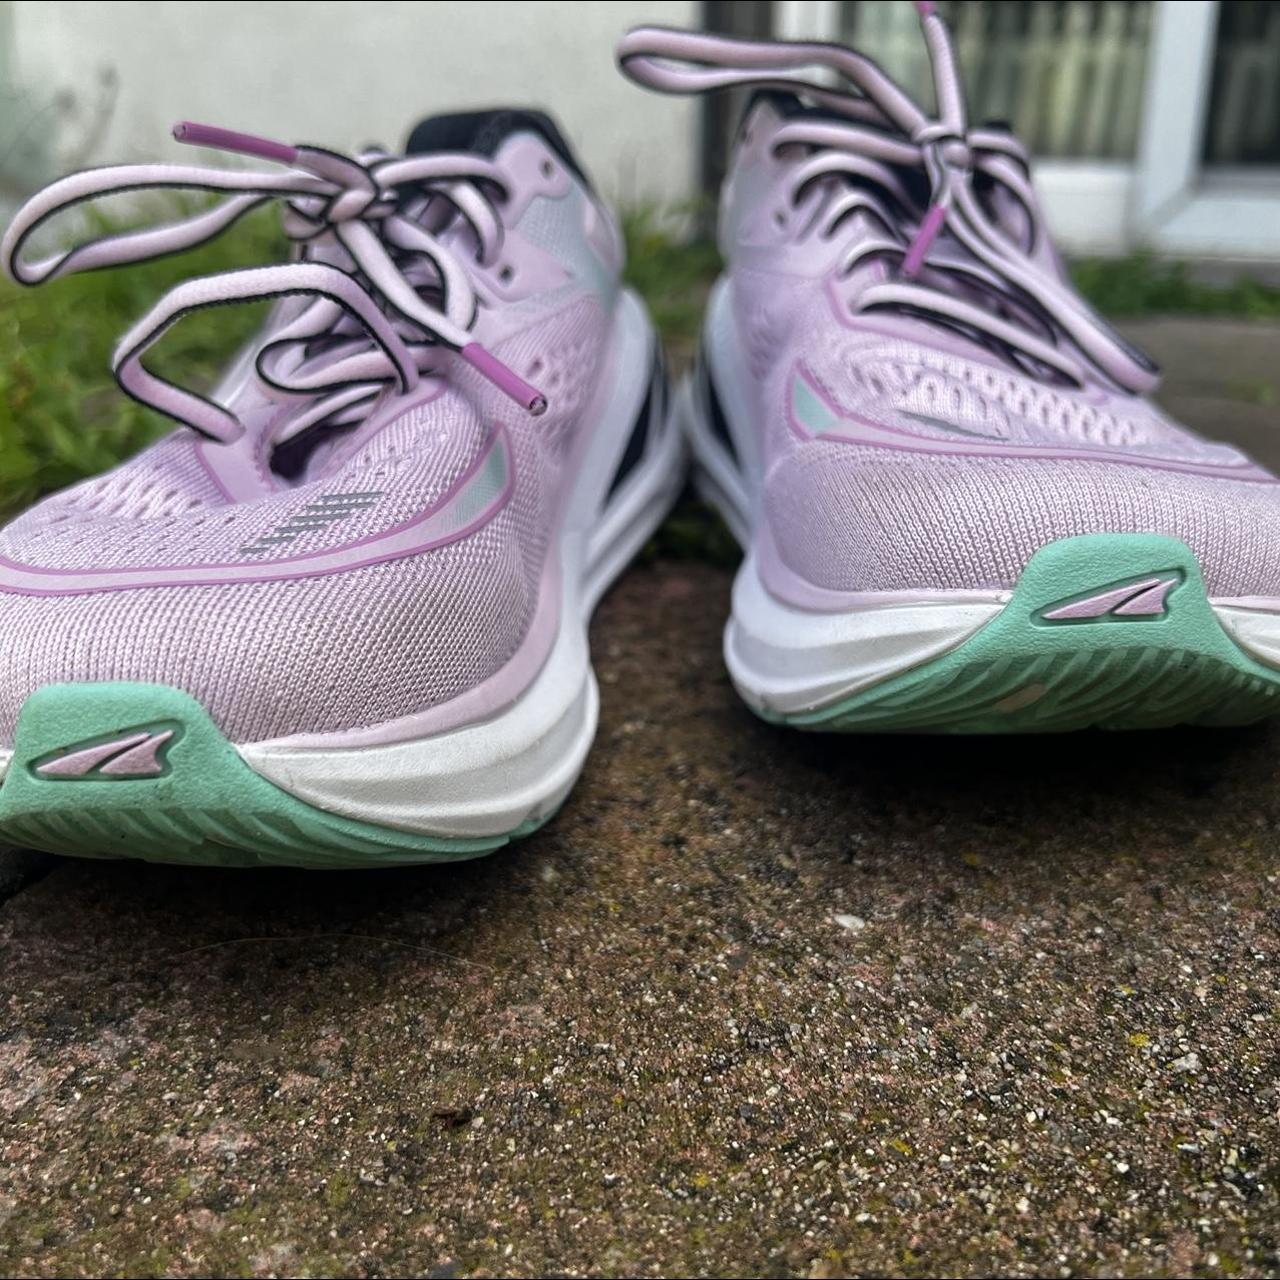 Altra Women's Pink and Purple Trainers | Depop